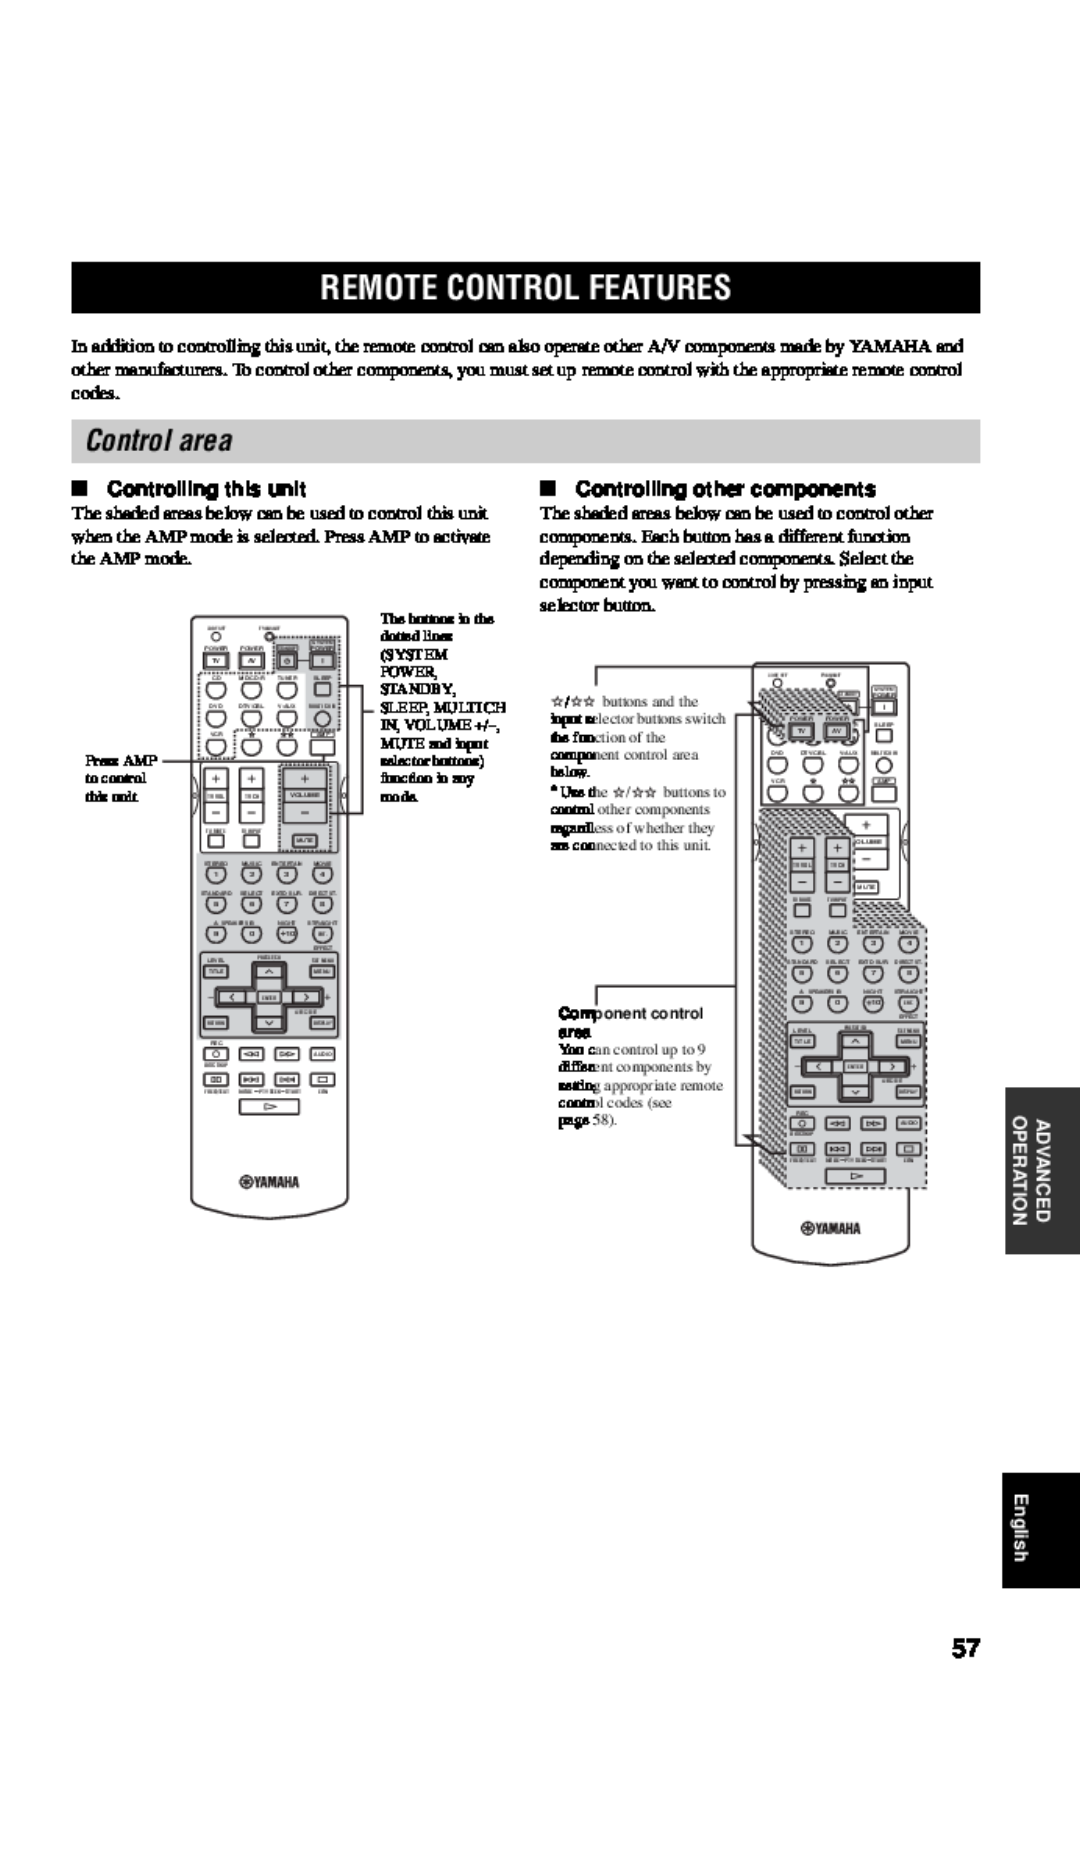 Yamaha RX-V557 owner manual Remote Control Features, Control area, Controlling this unit, Controlling other components 